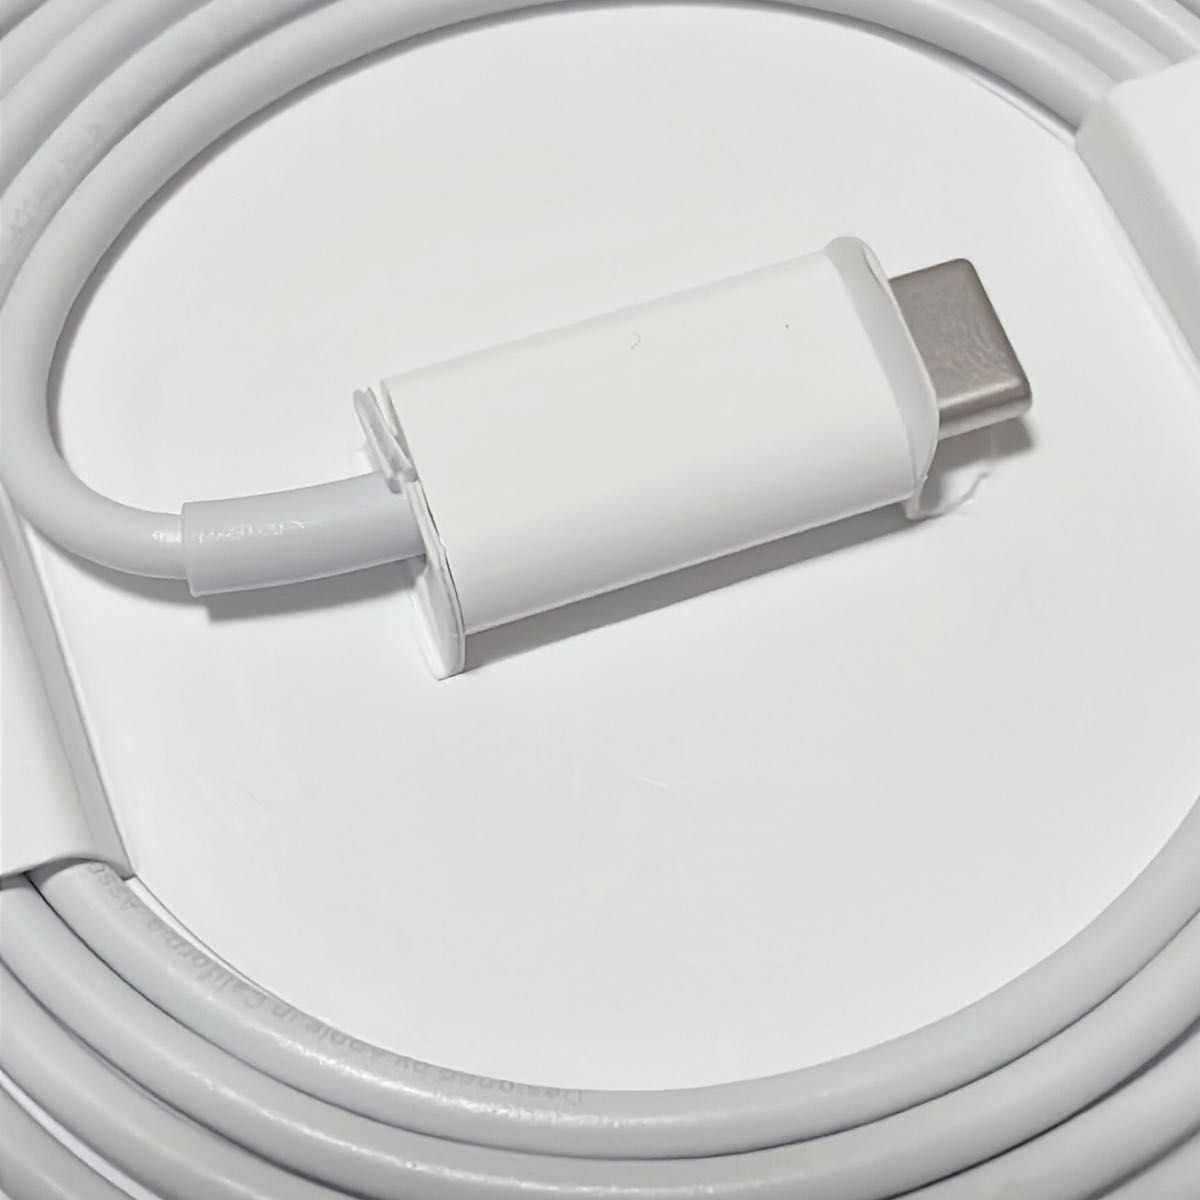 Apple正規品  MagSafe充電器 ワイヤレス充電